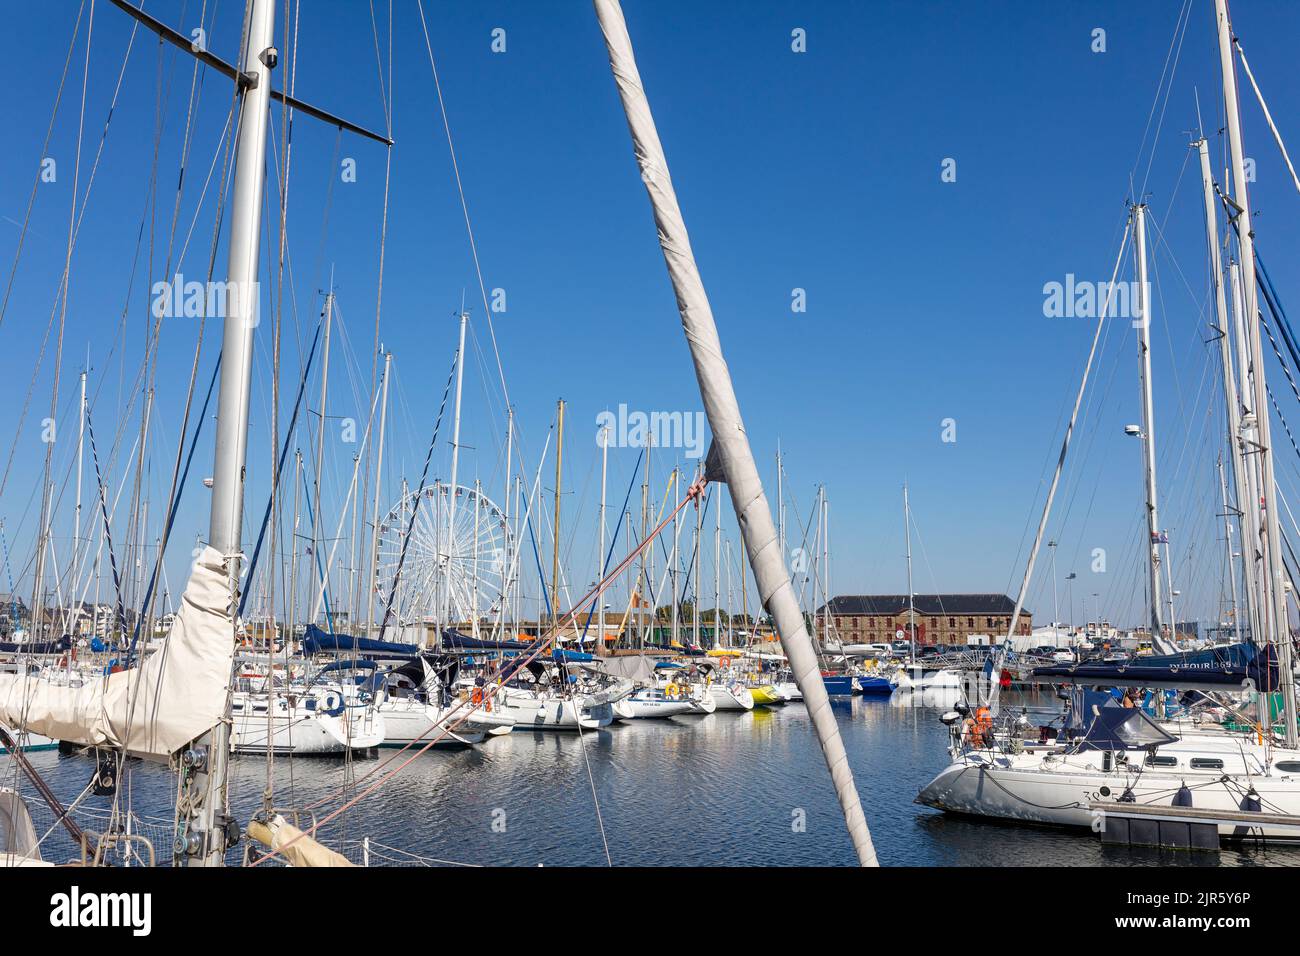 Harbor of Saint-Malo with yachts and sail ships Stock Photo